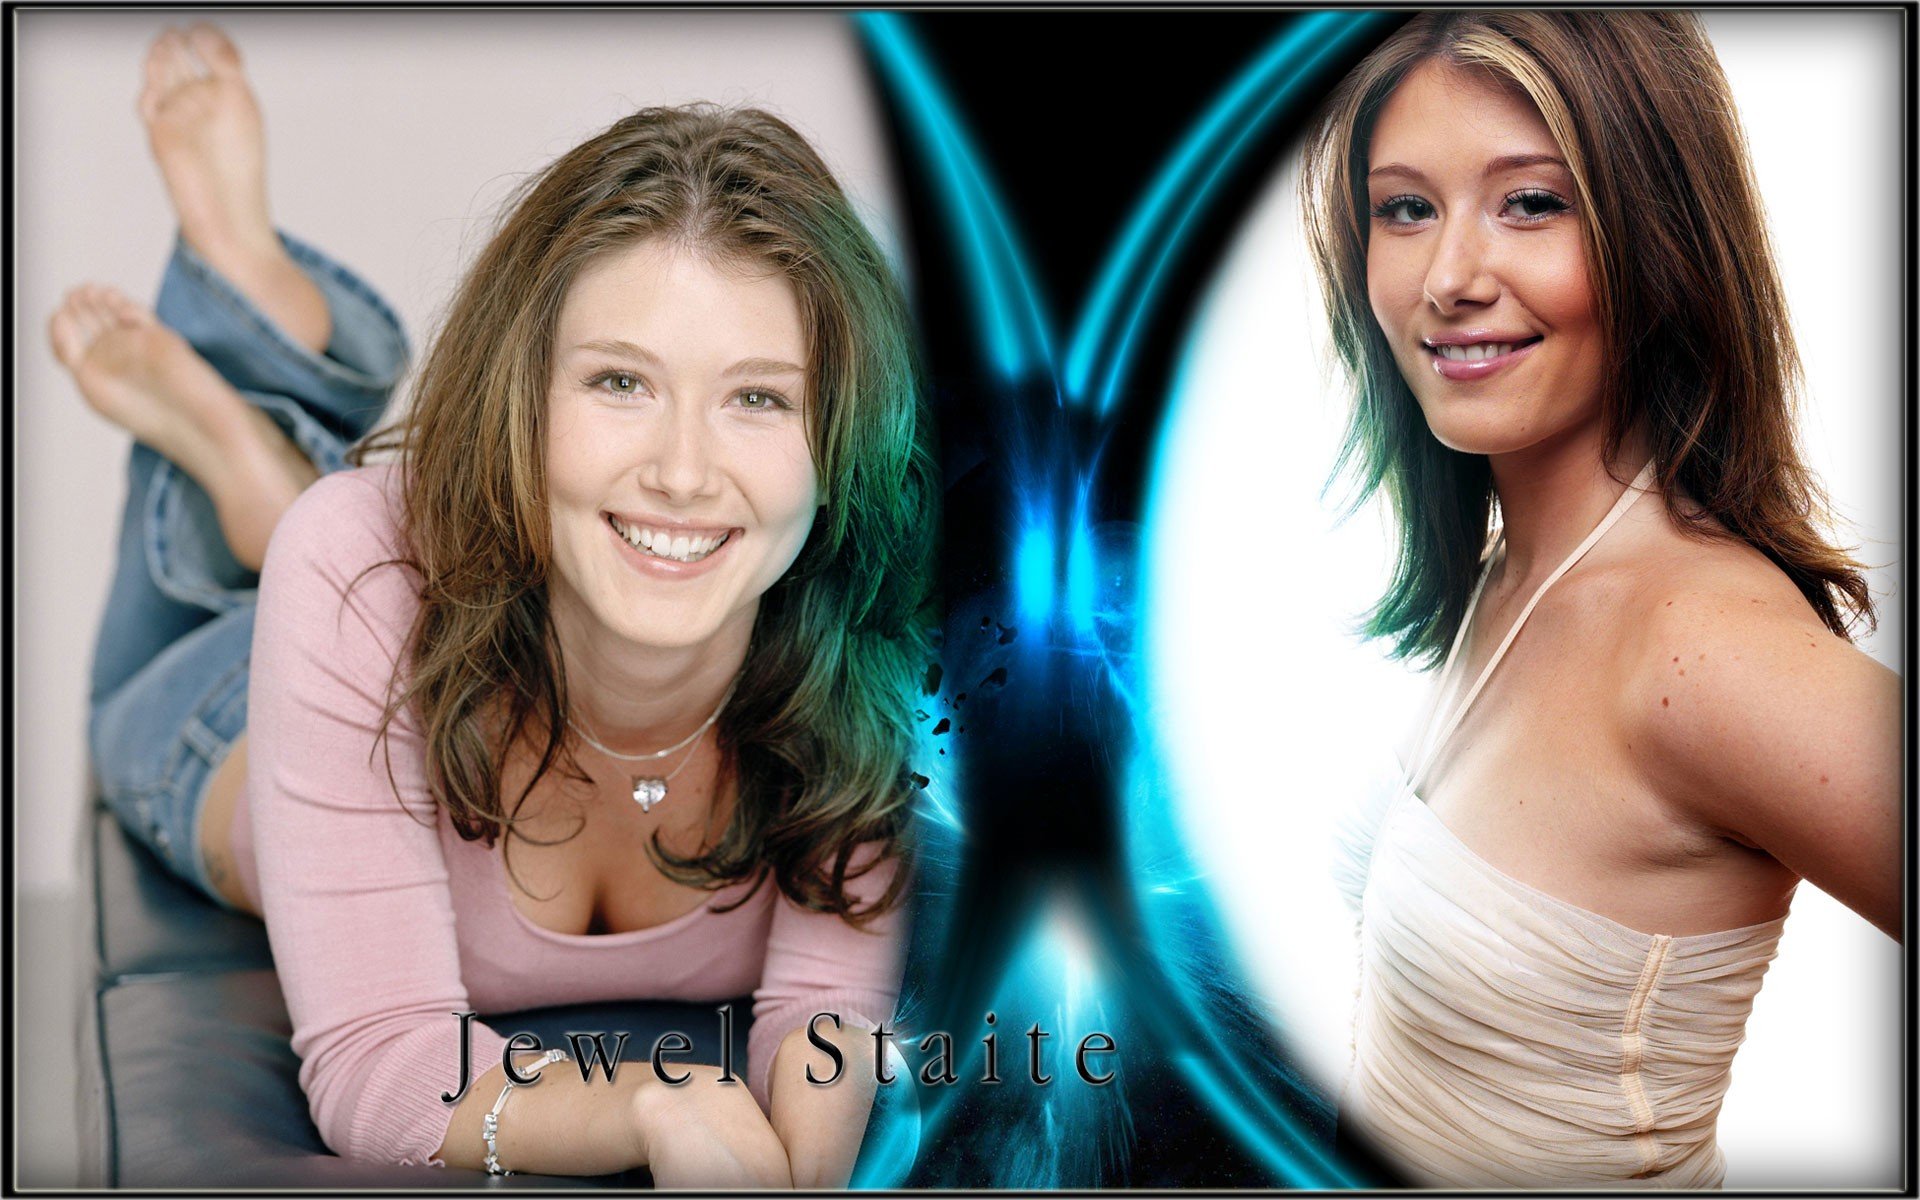 Jewel staite pictures